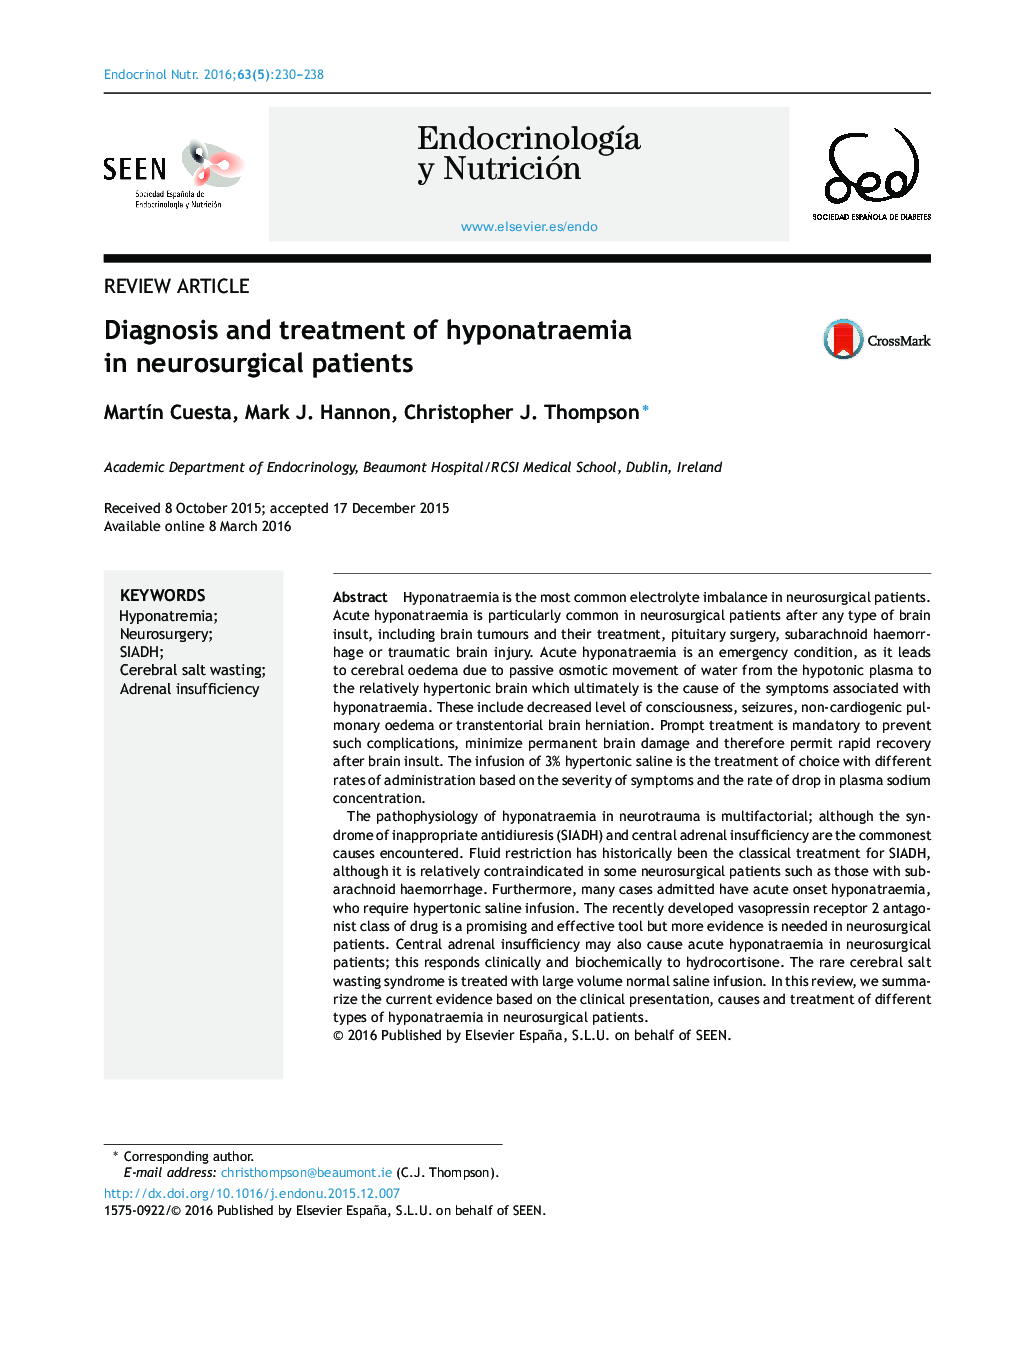 Diagnosis and treatment of hyponatraemia in neurosurgical patients